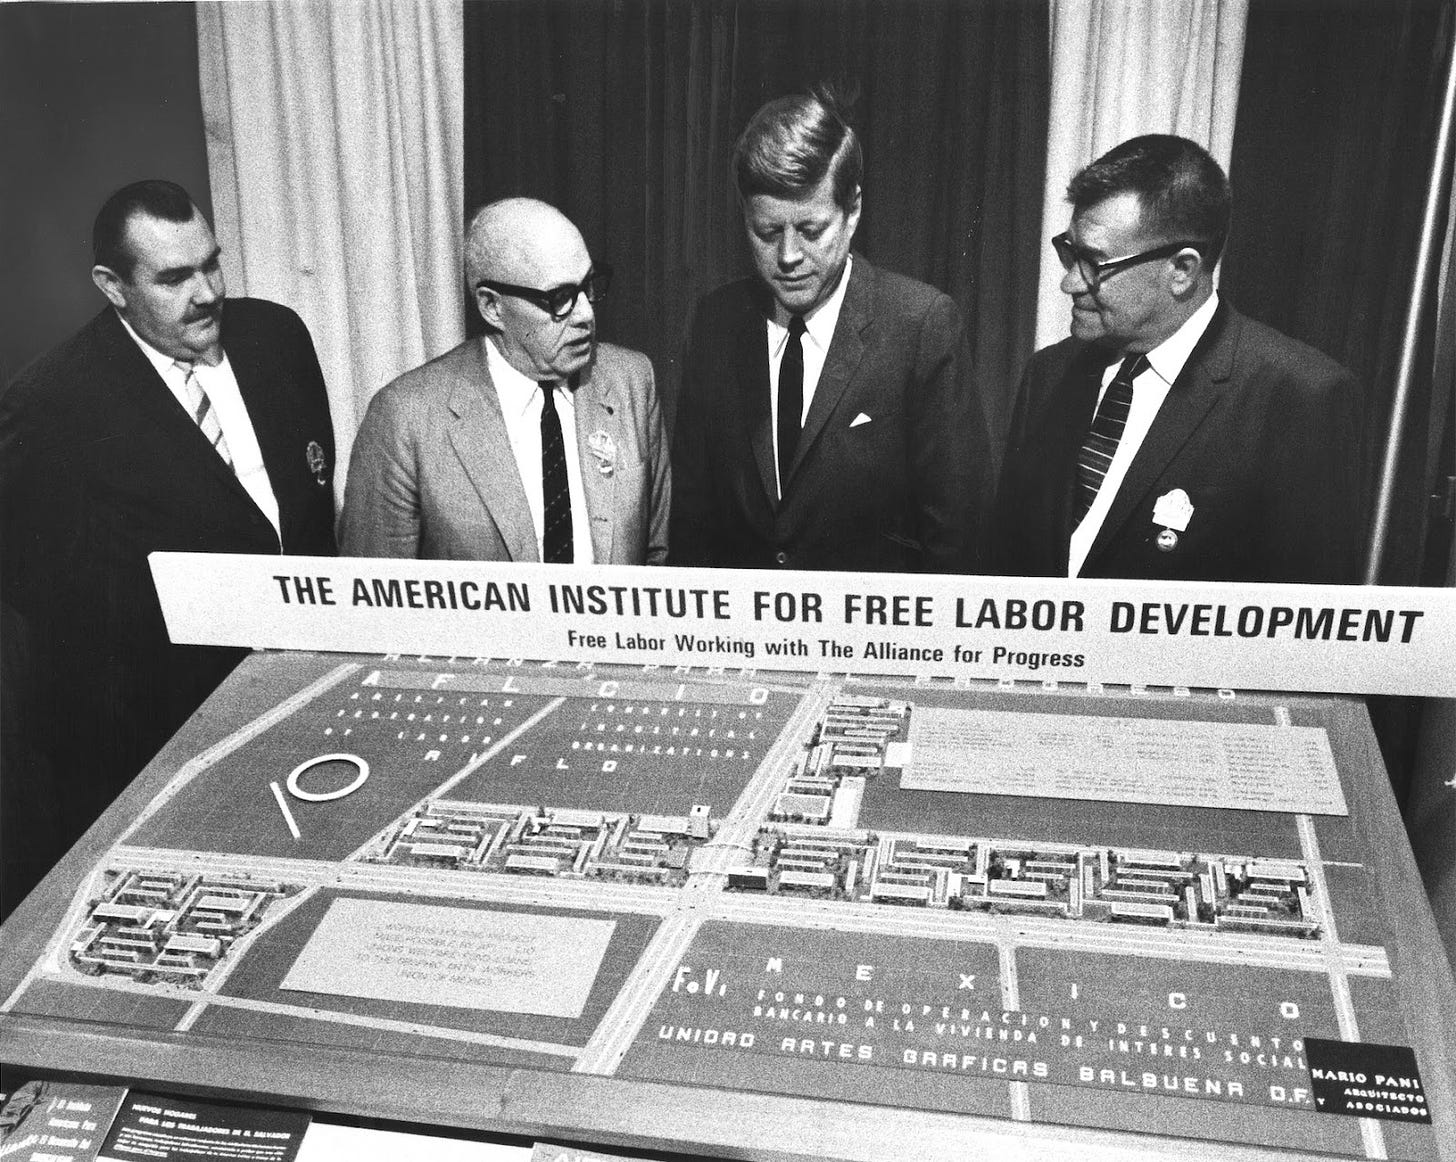 president JFK stands next to men in suits in front of a model of the american institute for free labor development